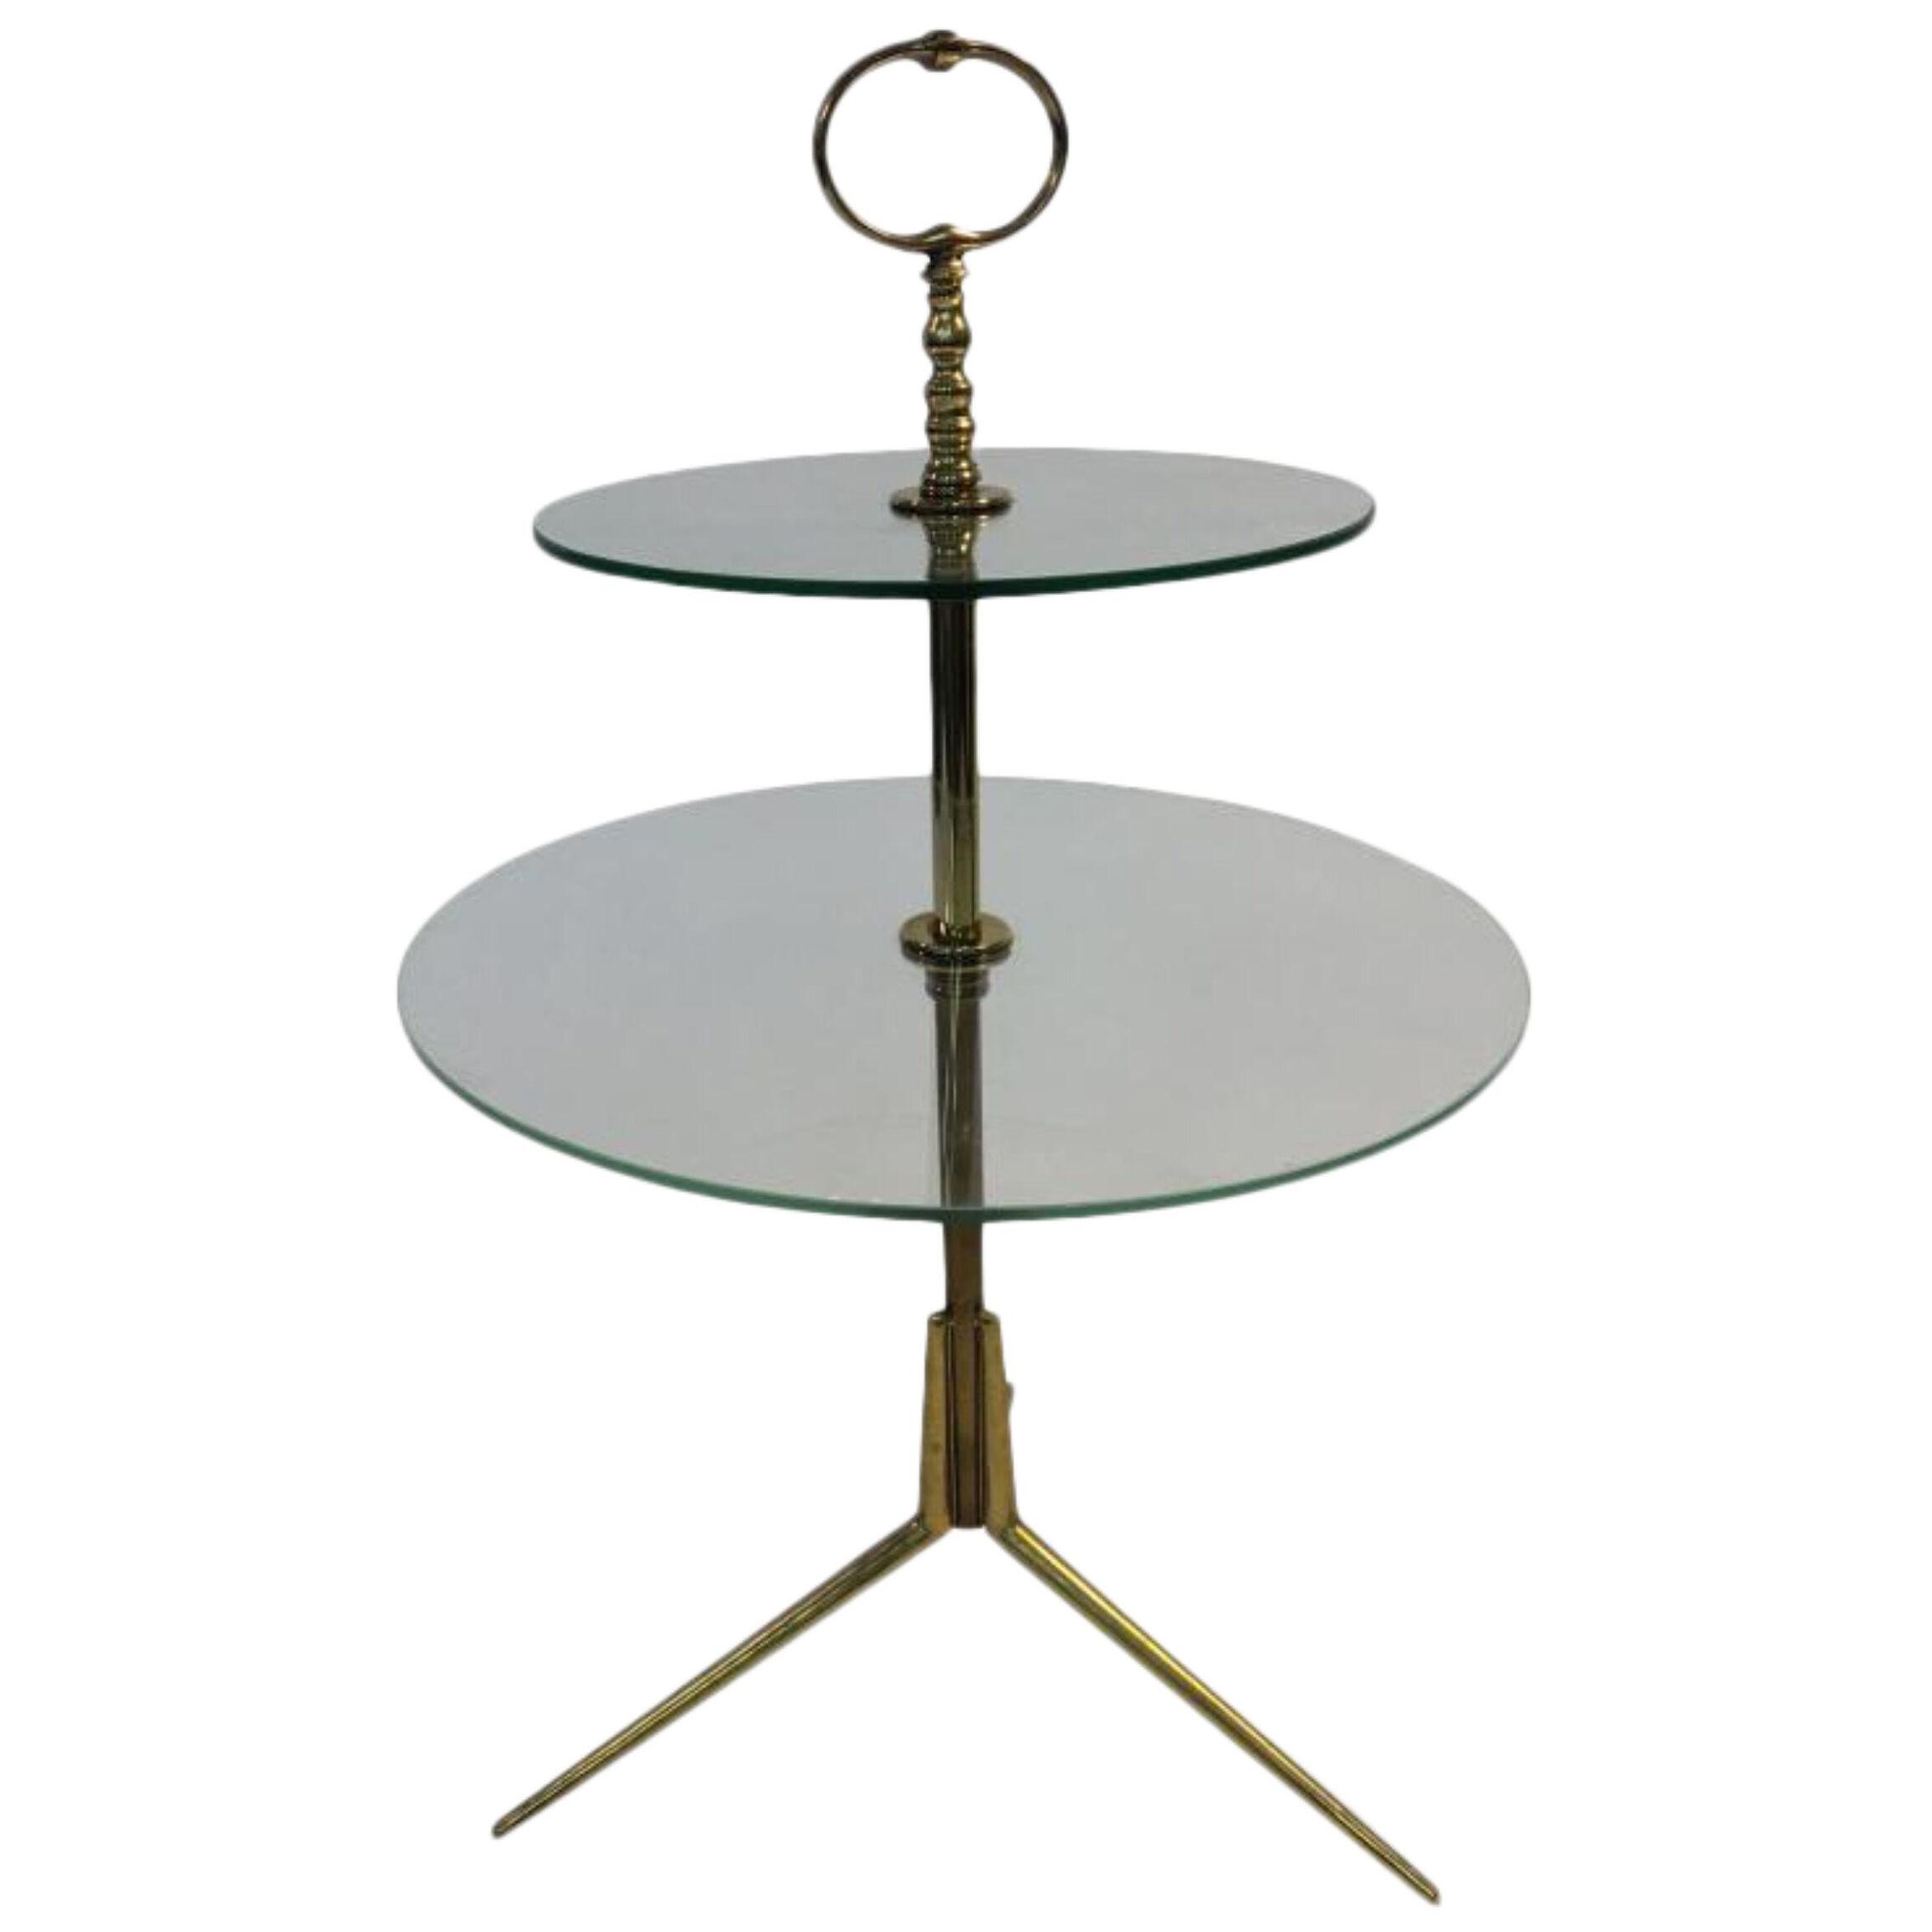 Midcentury Glass and Brass Tripod Table Attributed to Pietro Chiesa	